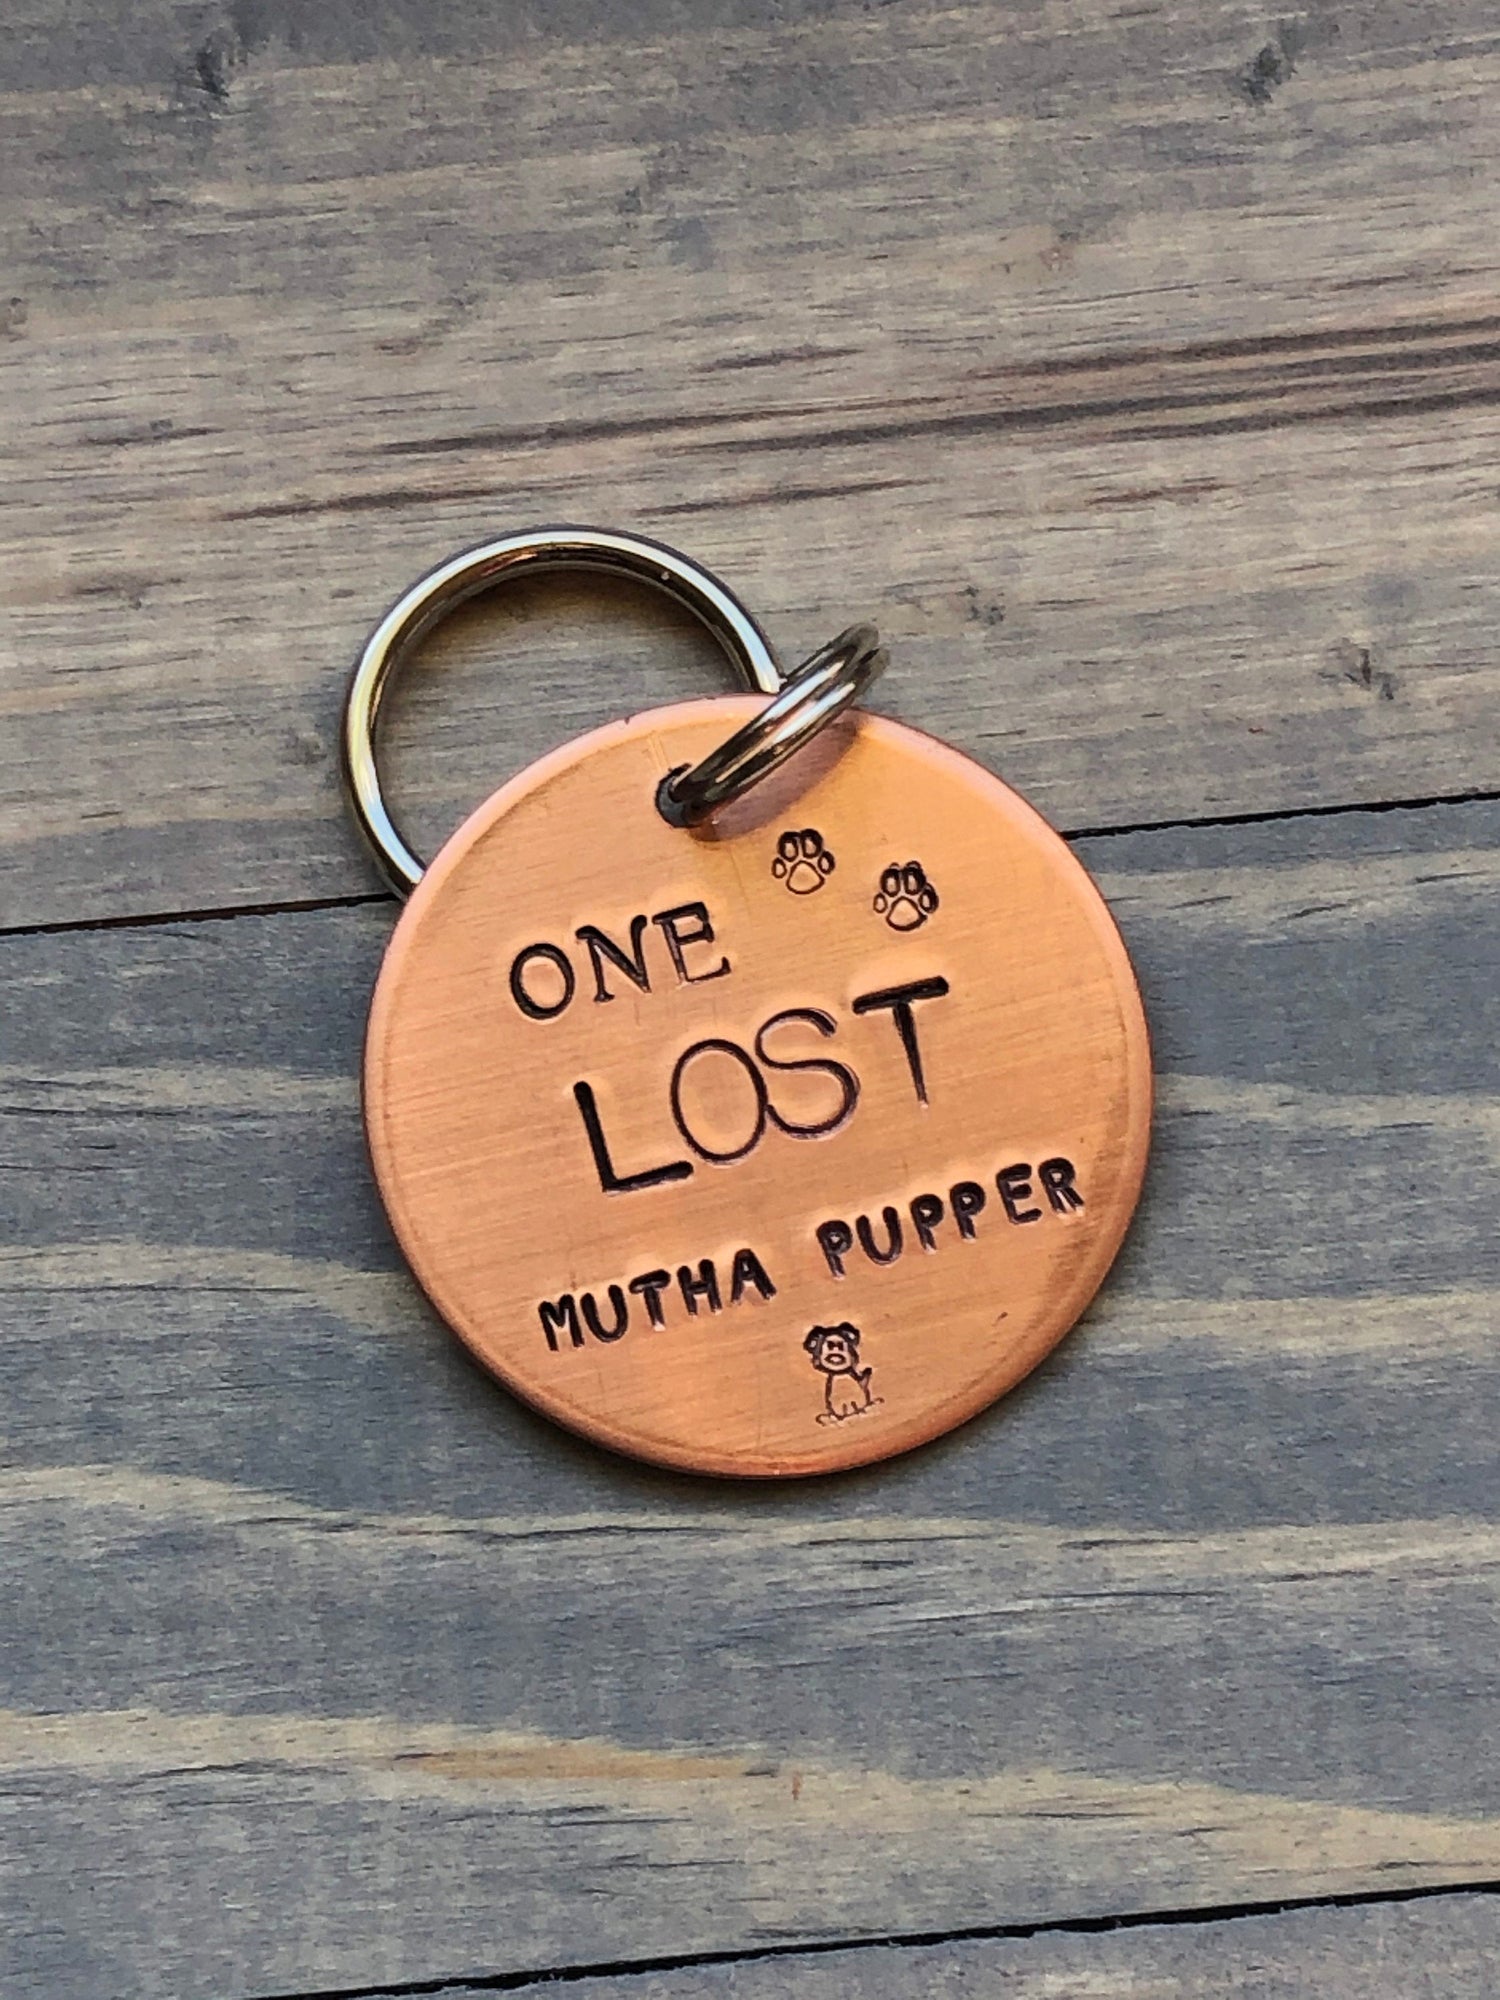 Funny Dog Tag, Hand Stamped Pet ID, One Lost Mutha Pupper, Personalized Dog Tag for Dog, Lost AF Dog